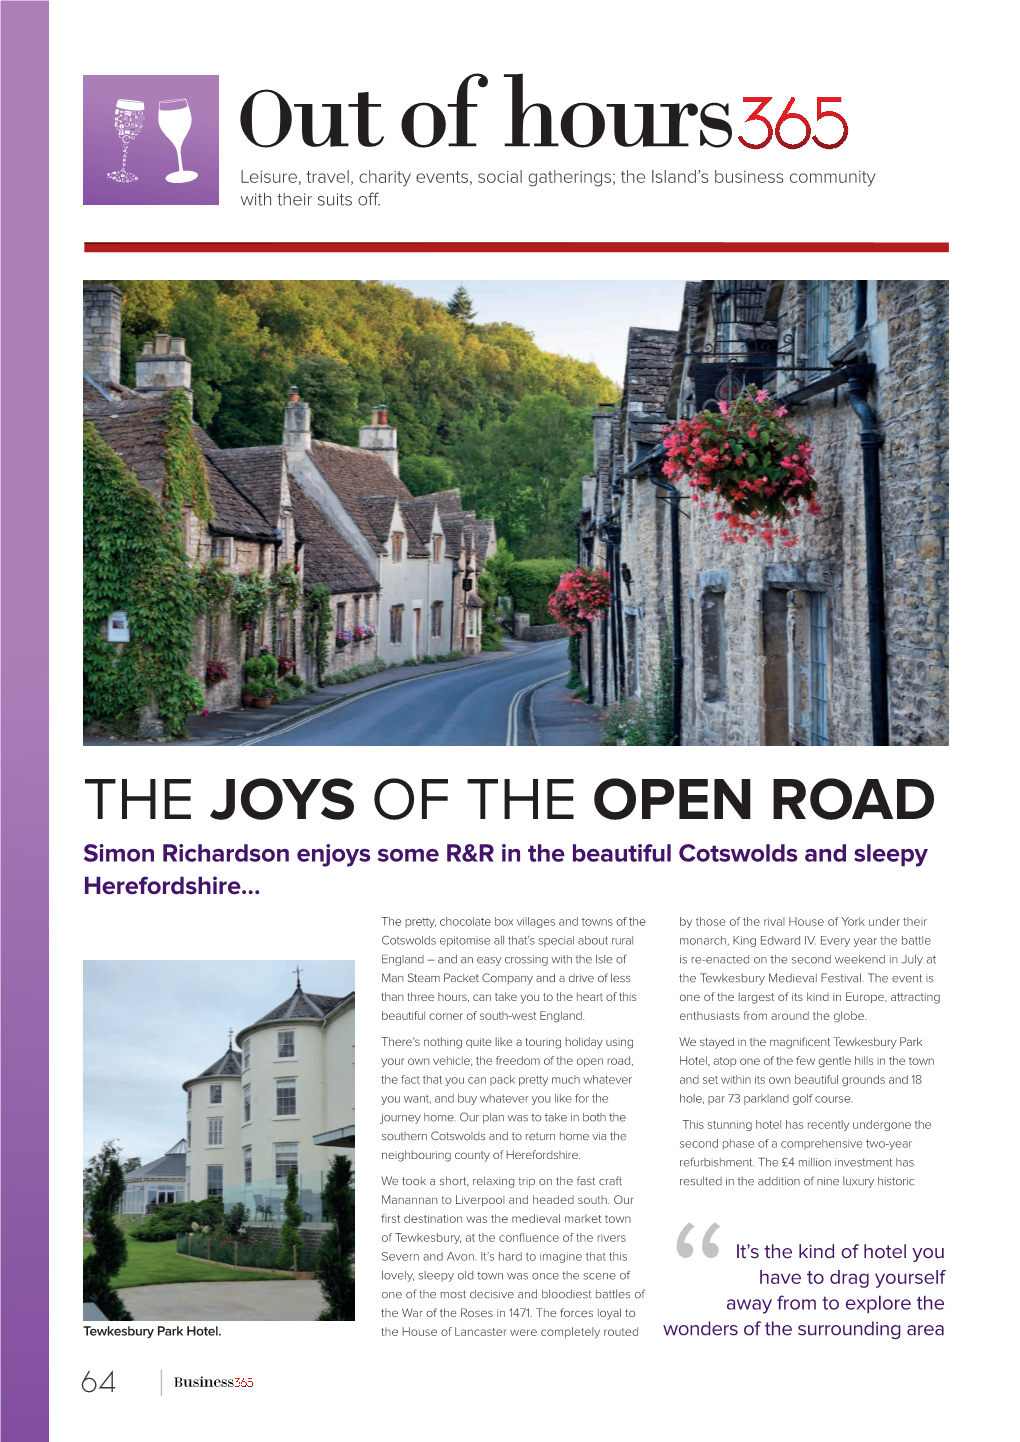 THE JOYS of the OPEN ROAD Simon Richardson Enjoys Some R&R in the Beautiful Cotswolds and Sleepy Herefordshire…